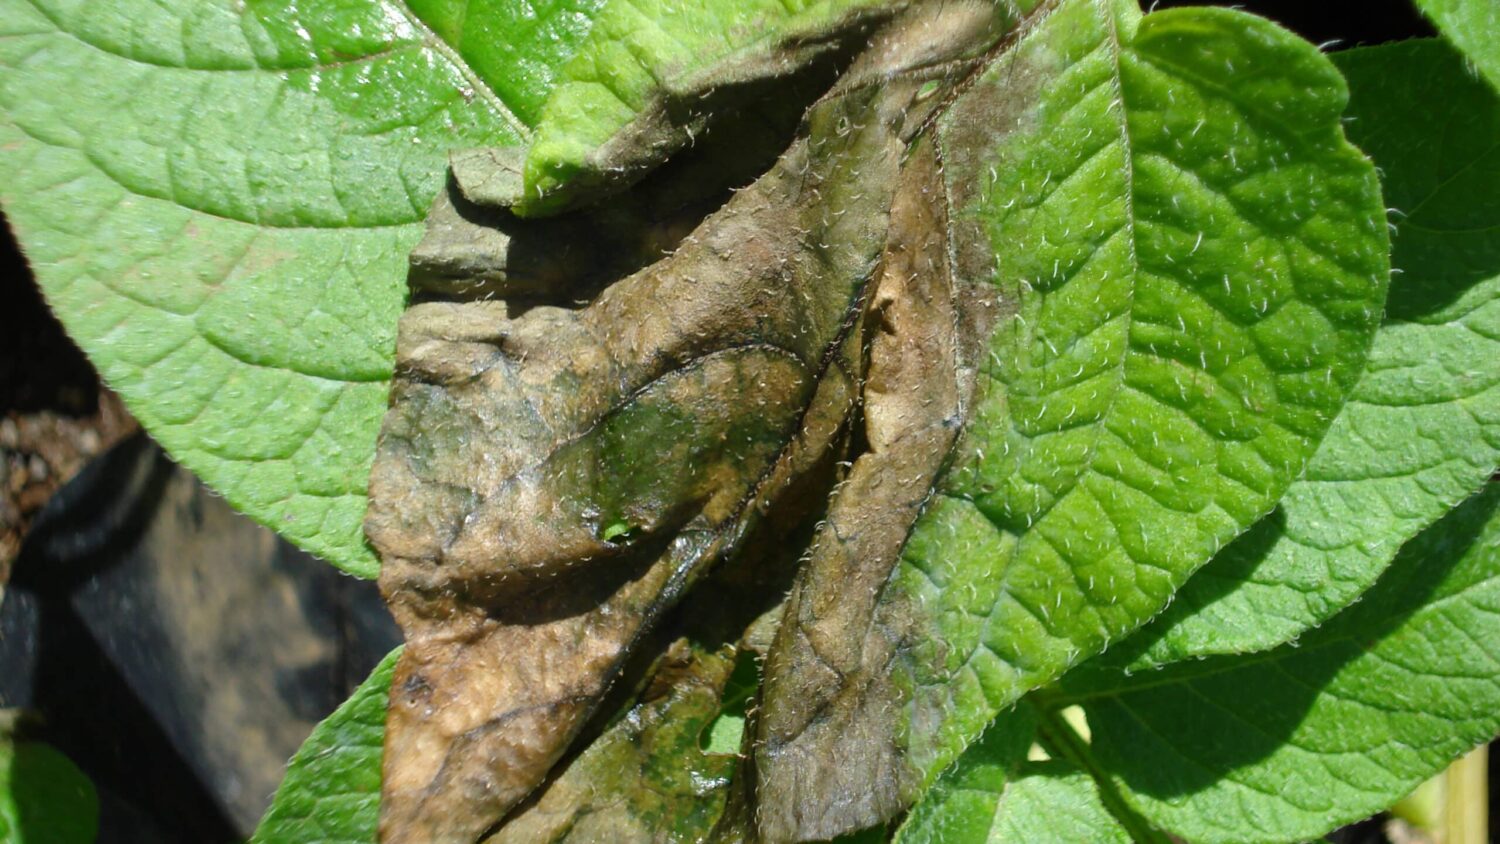 Potato plant with late blight